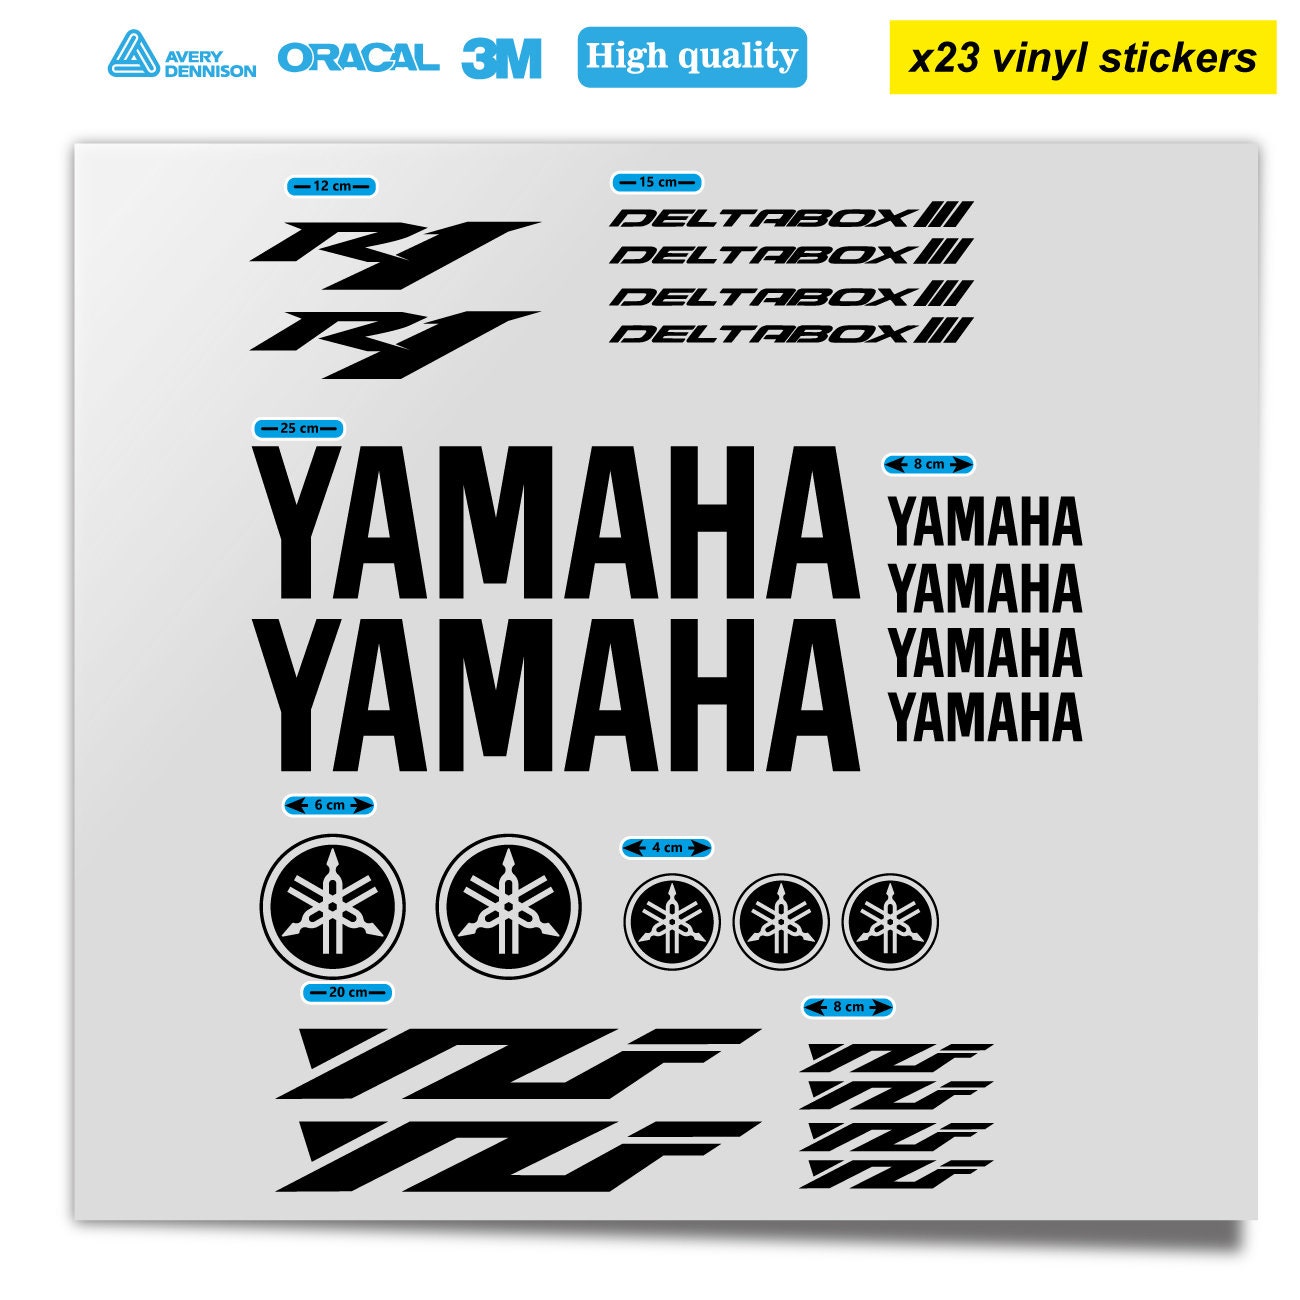 Buy Yamaha R1 Stickers Online In India -  India